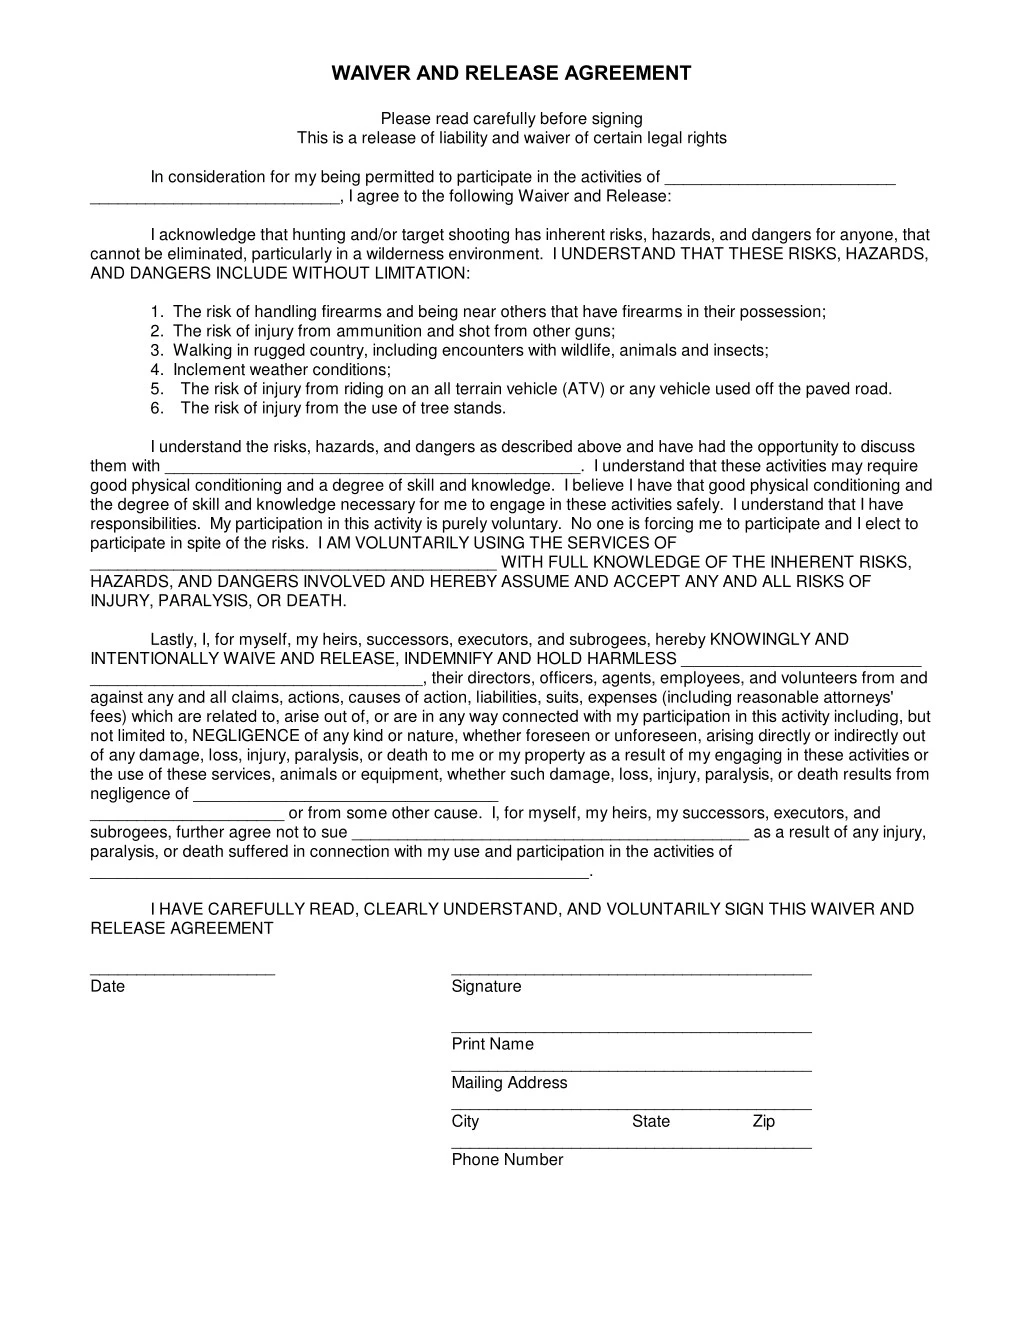 waiver and release agreement